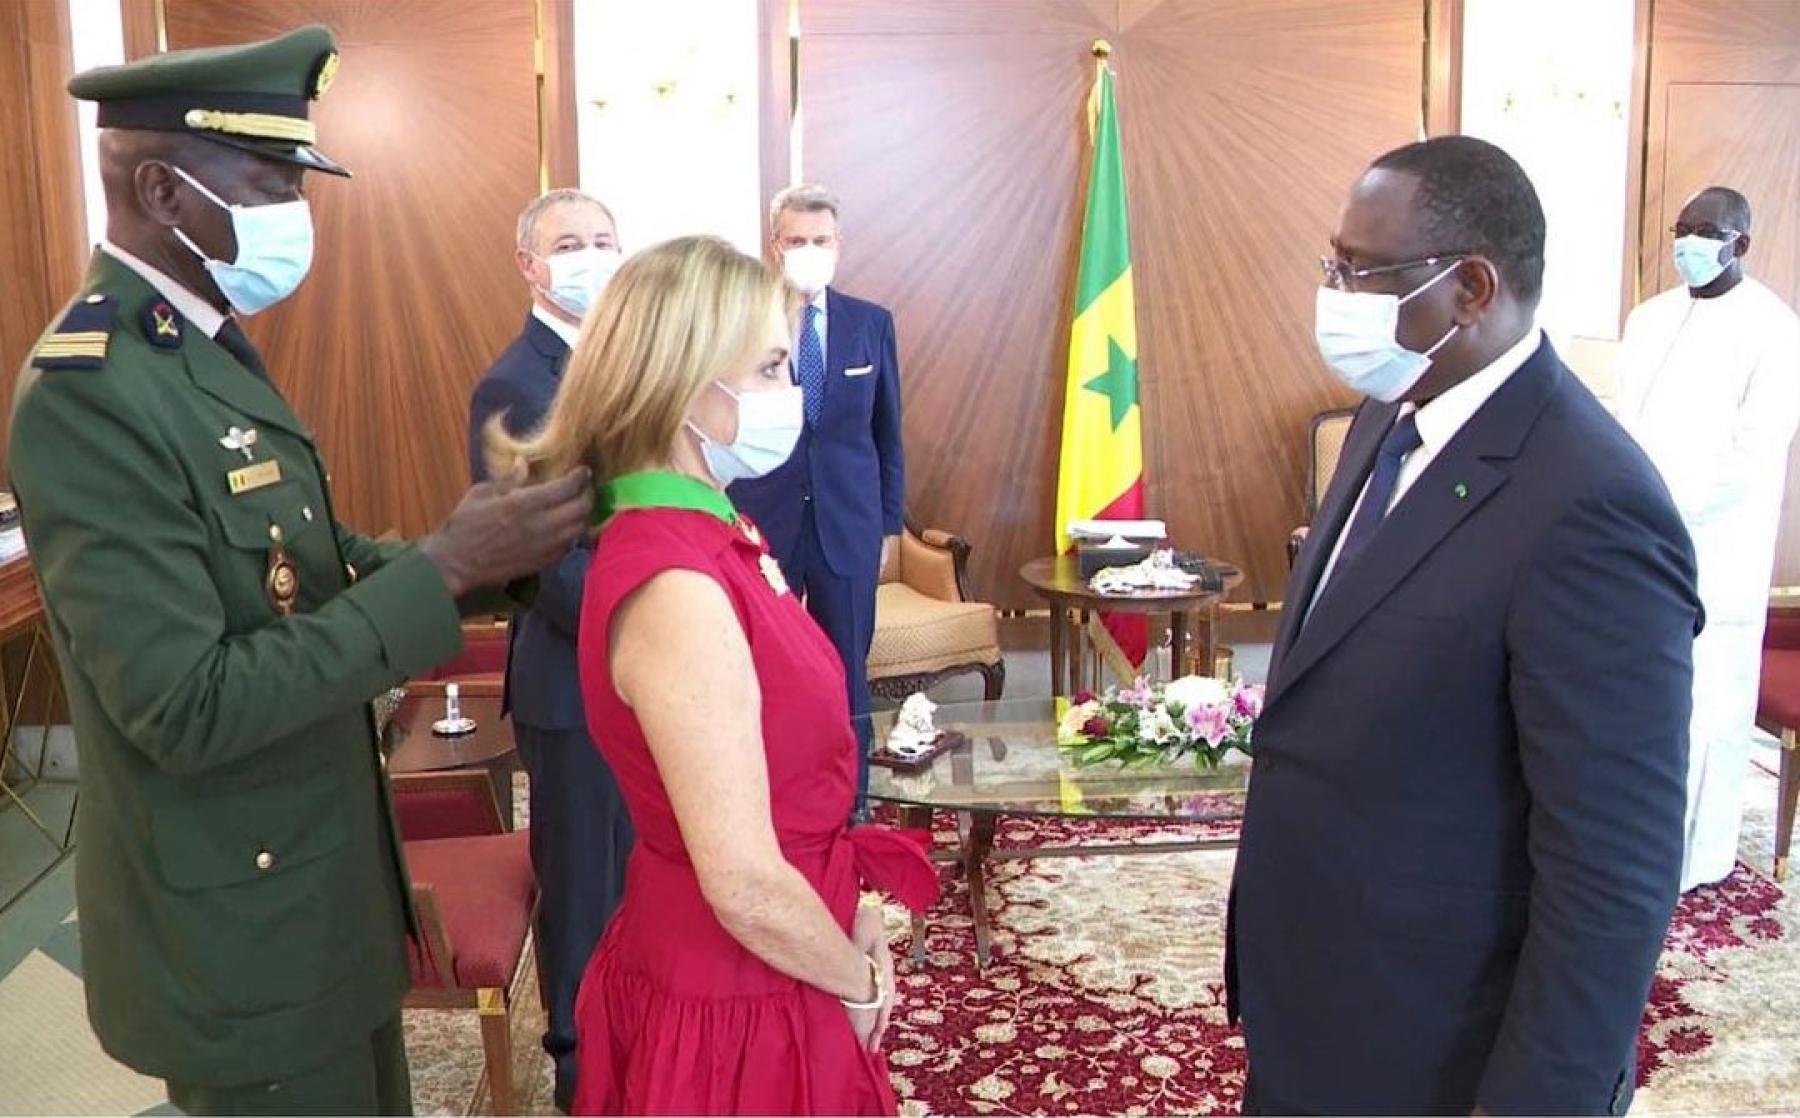 The President of the Cuomo Foundation awarded Senegal’s Highest Honour-the National Order of the Lion